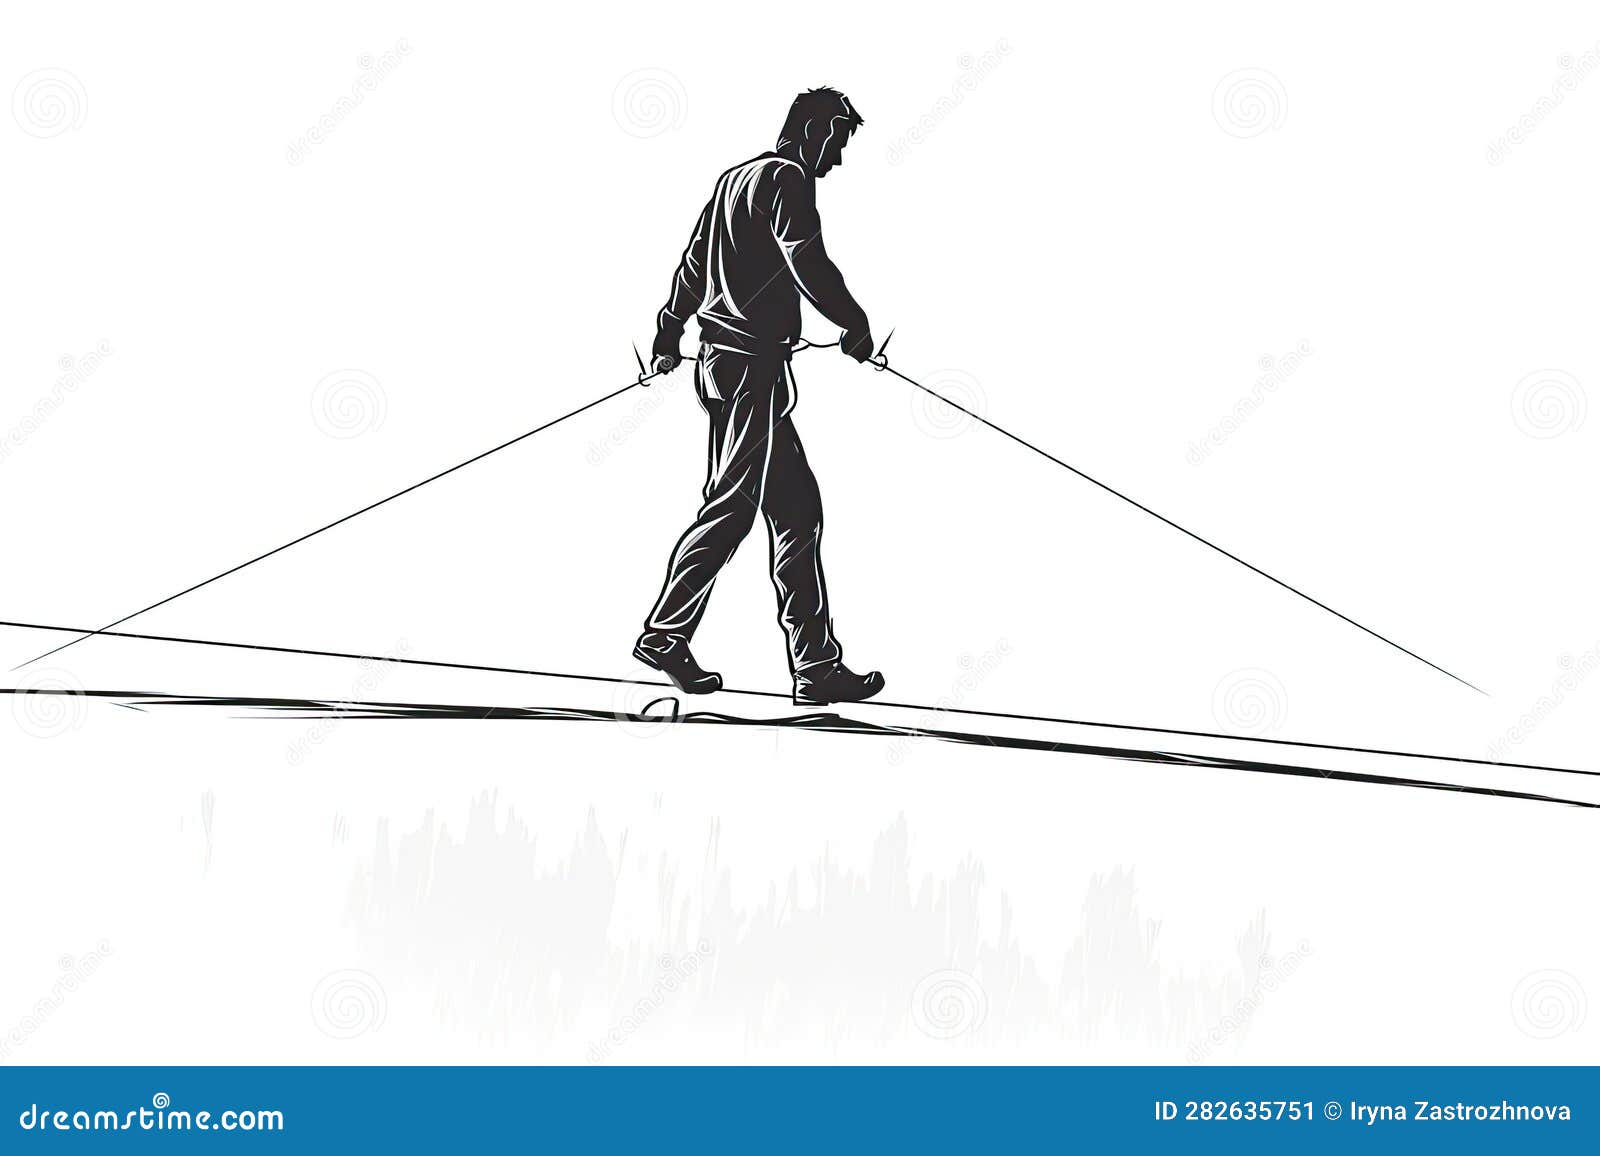 Tightrope Walker Silhouette on a White Background Stock